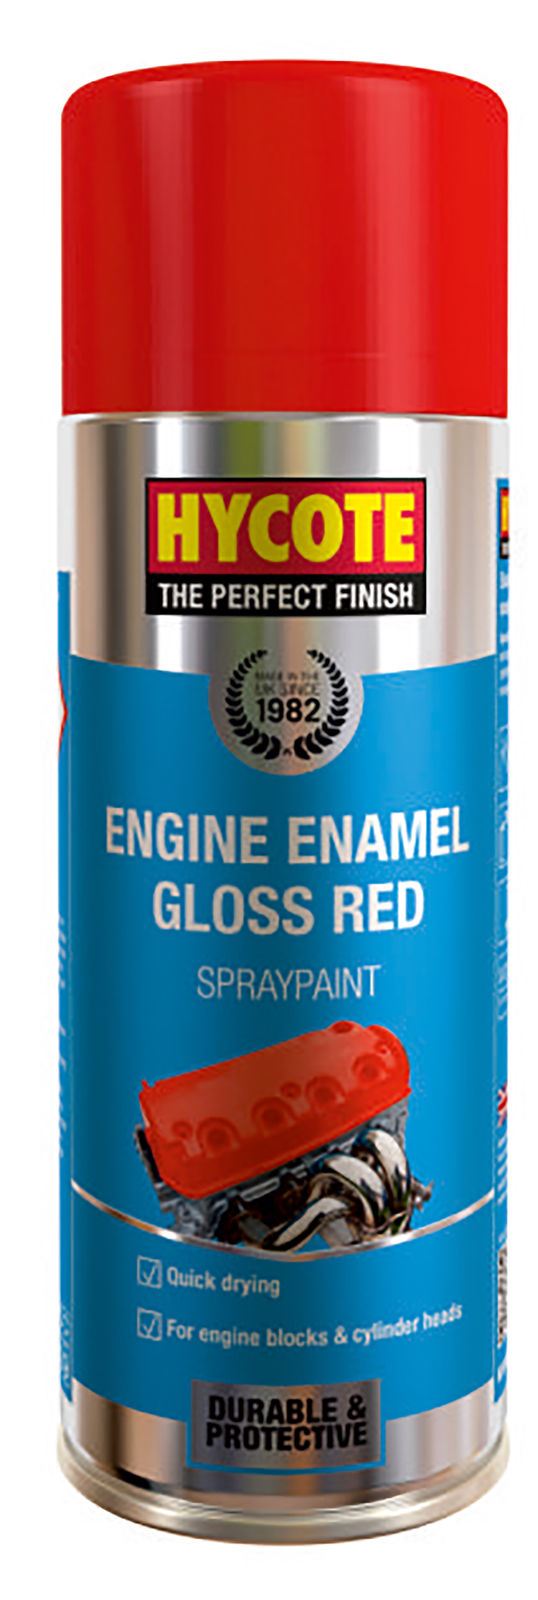 Hycote Engine Enamel Gloss Red Paint - 400ml